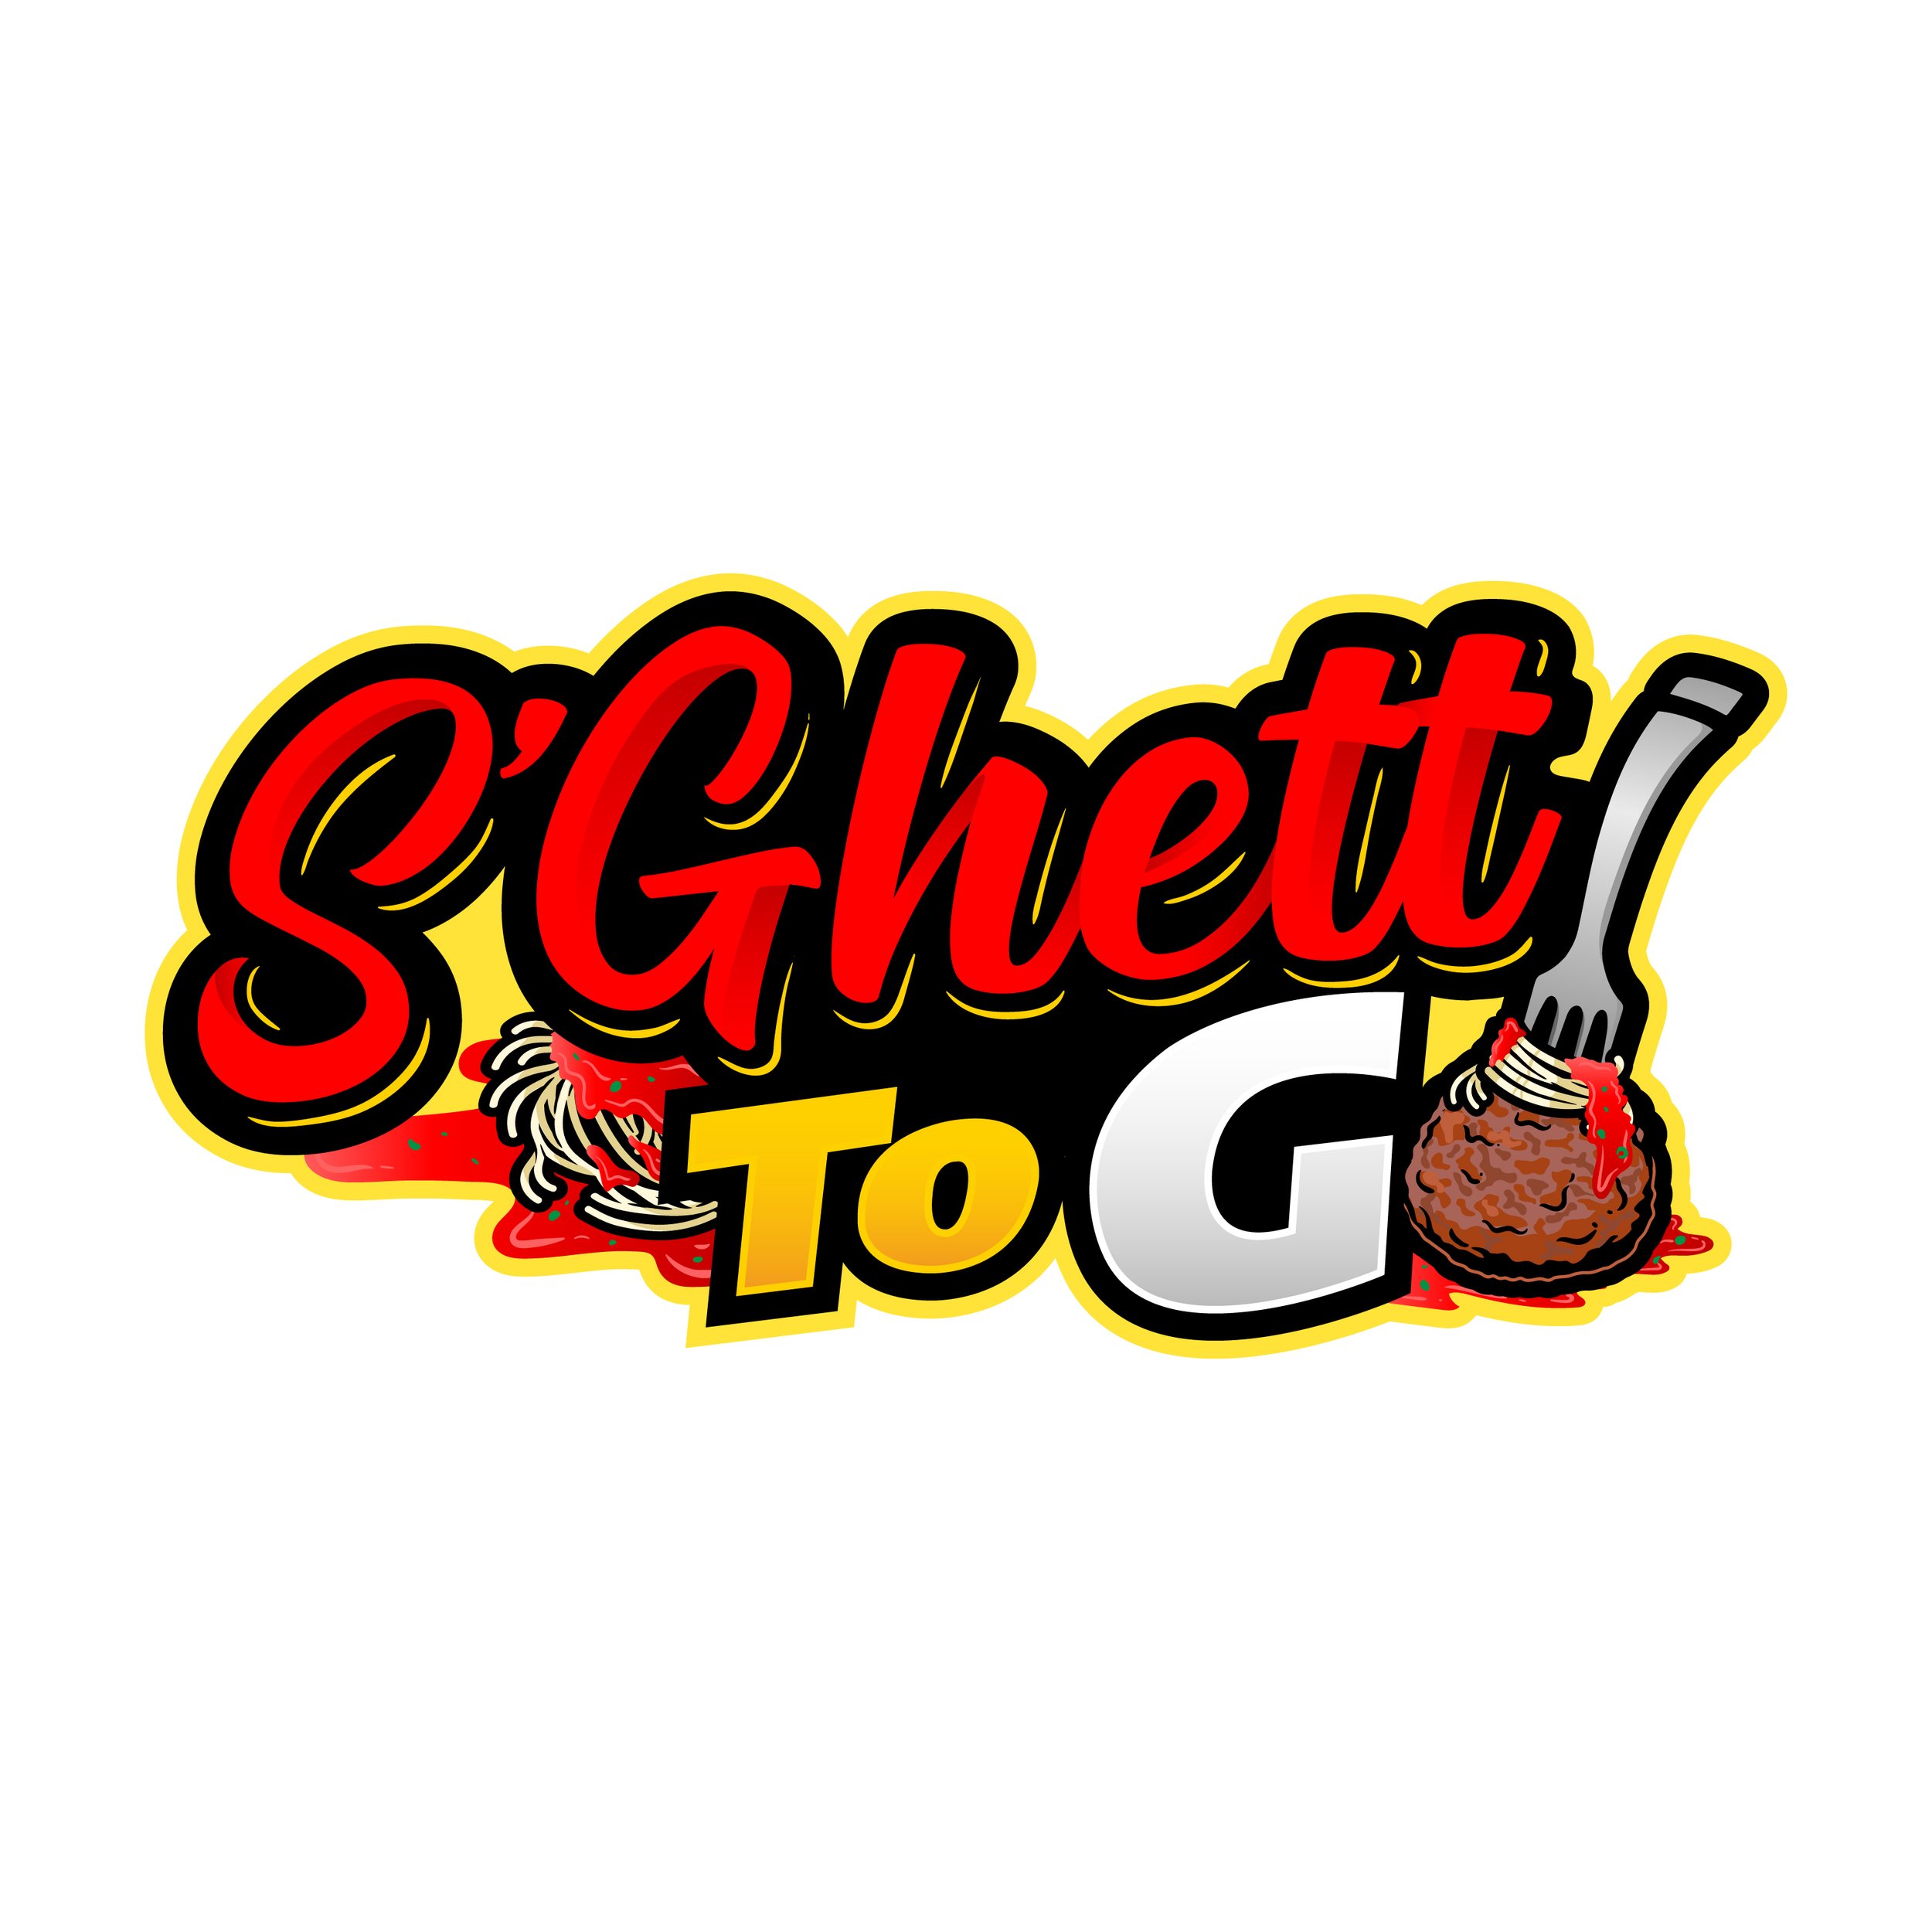 Get your Sghetti on!